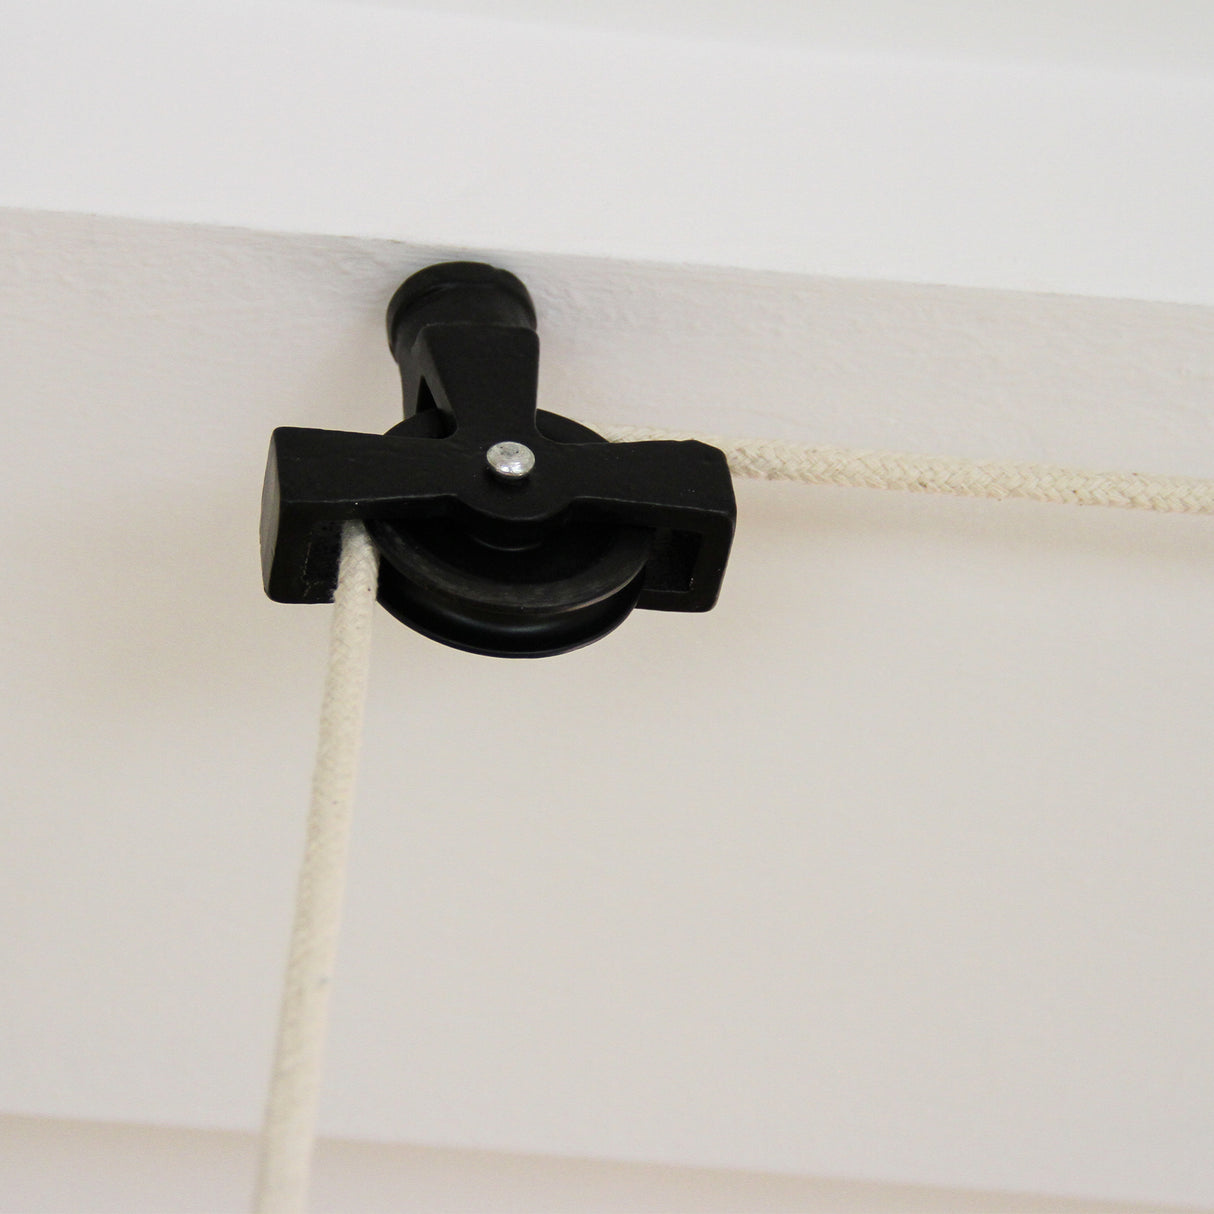 Clothing Airer Ceiling Pulley - Black - 1.8m